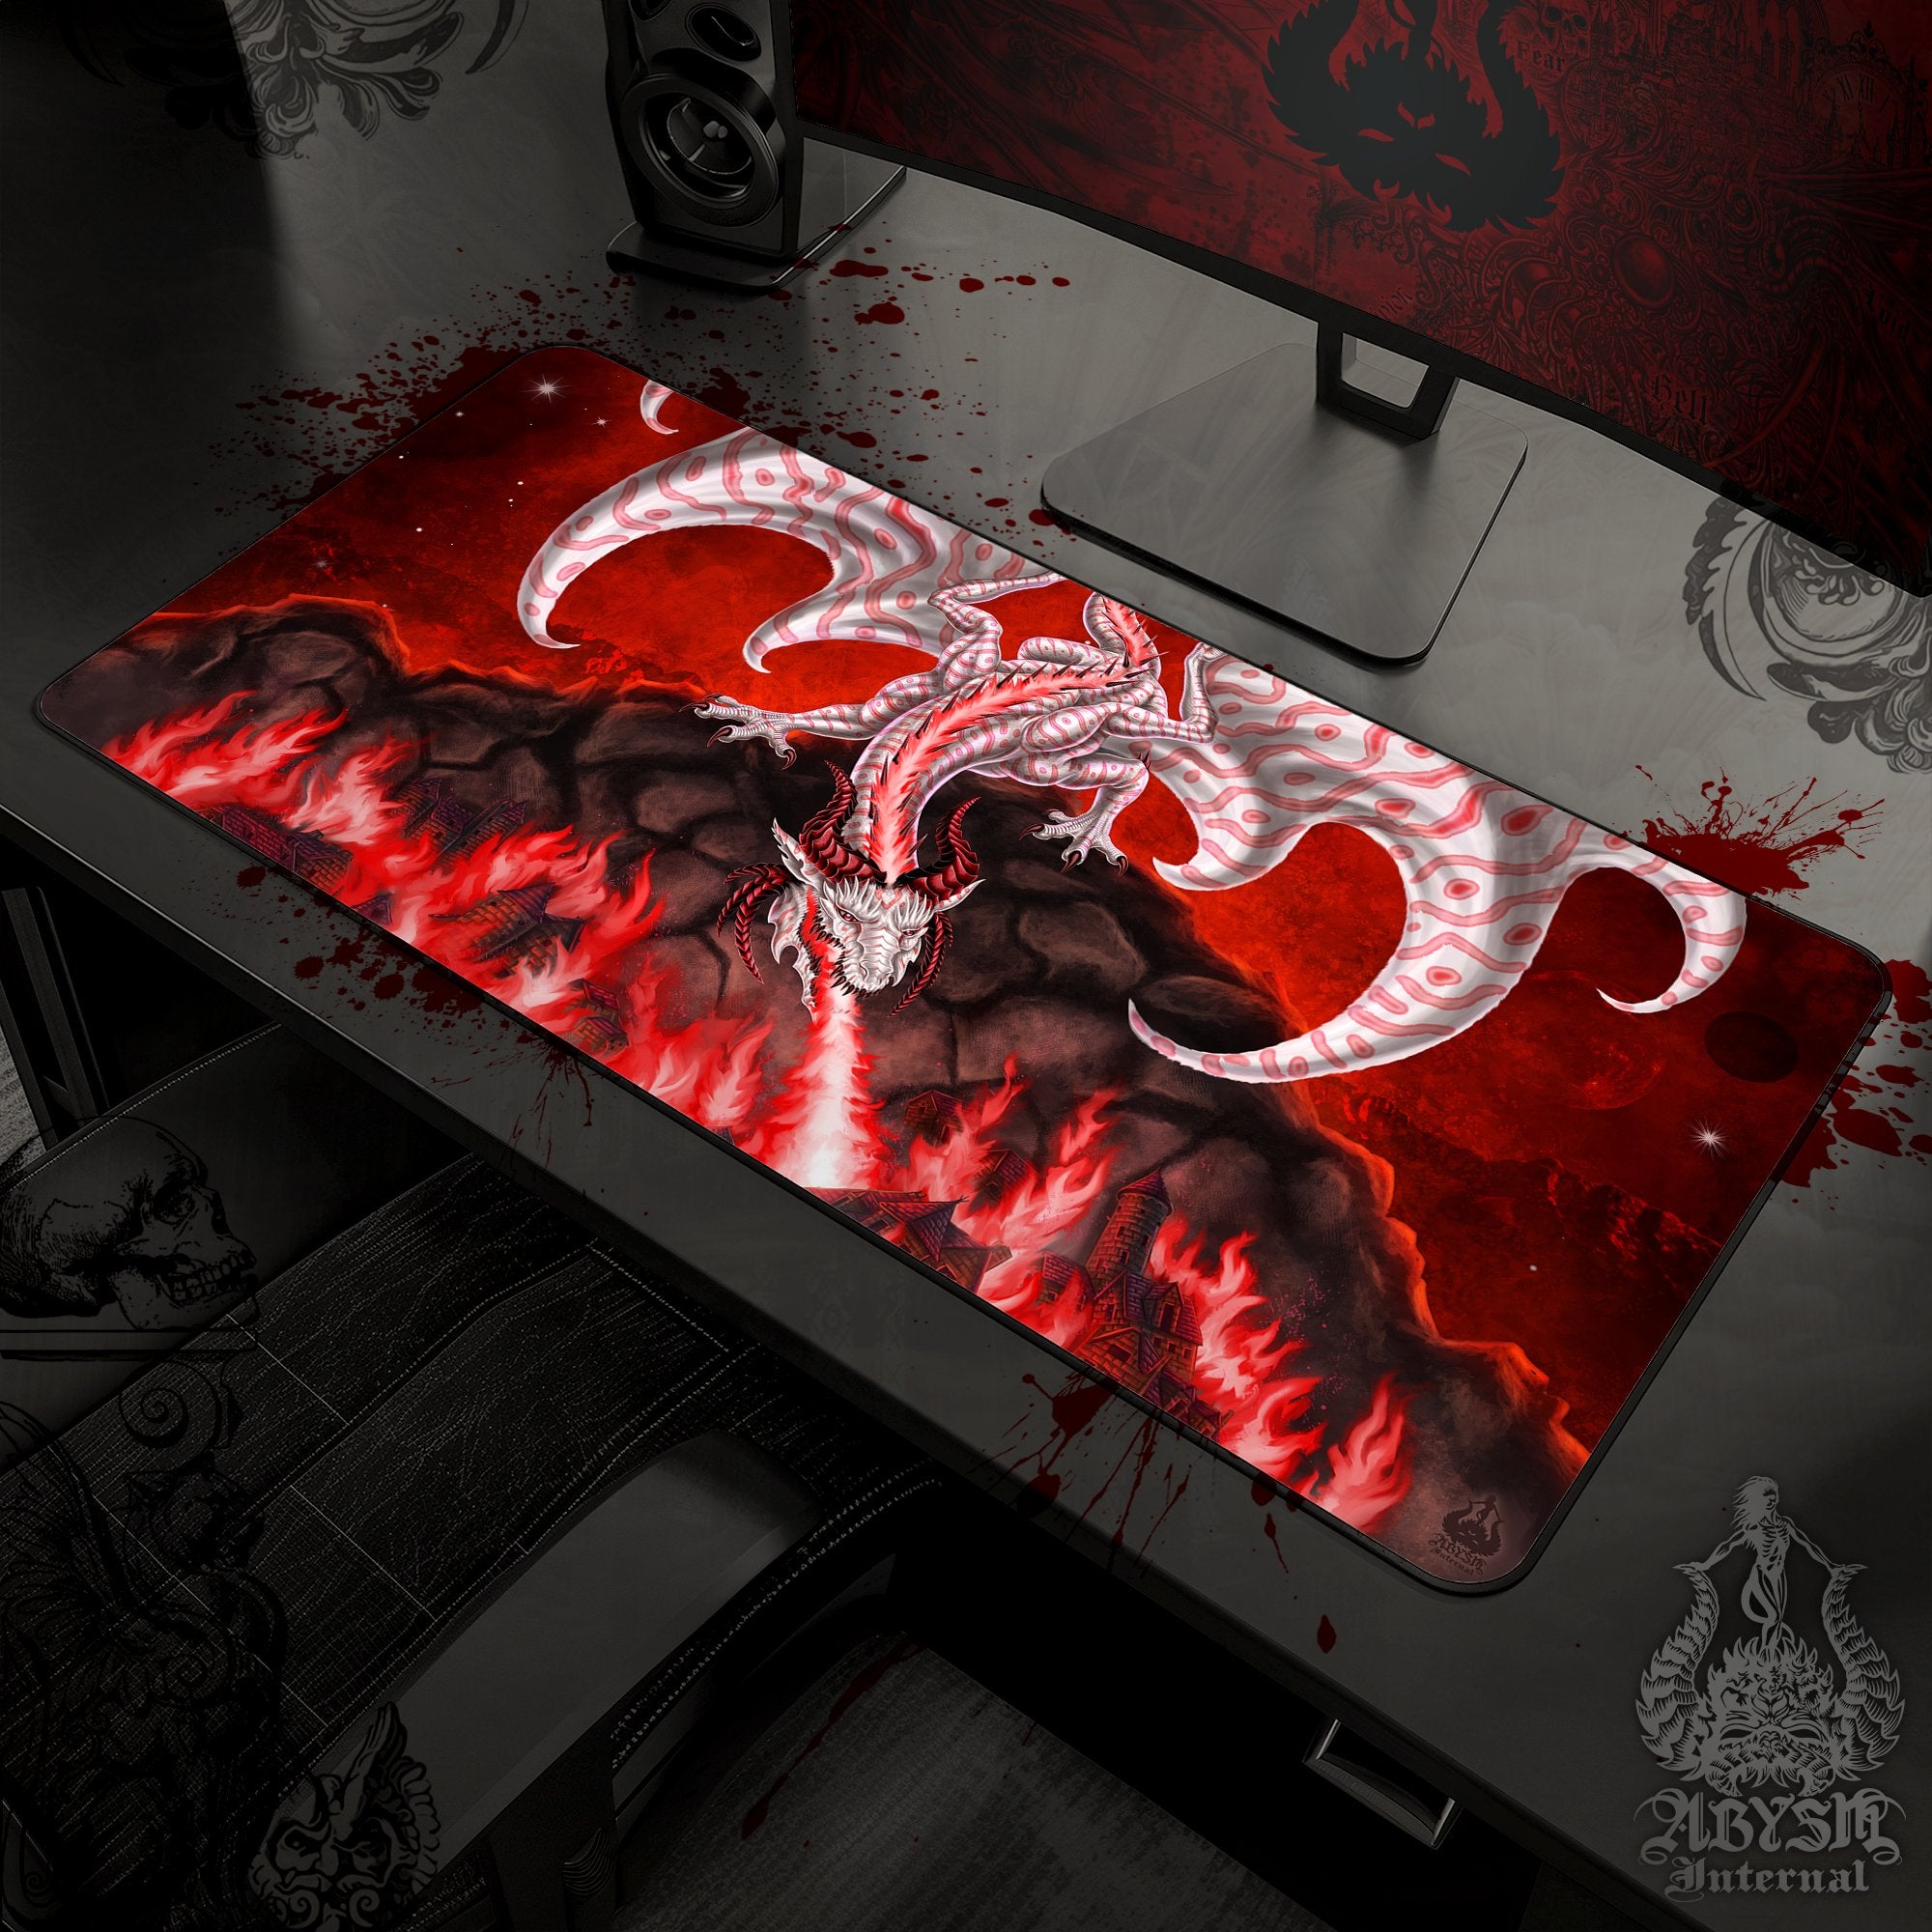 White Dragon Workpad, Fantasy Art Gaming Mouse Pad, Game Desk Mat, Goth Red Table Protector Cover, RPG, DM Gift Print - Fire - Abysm Internal